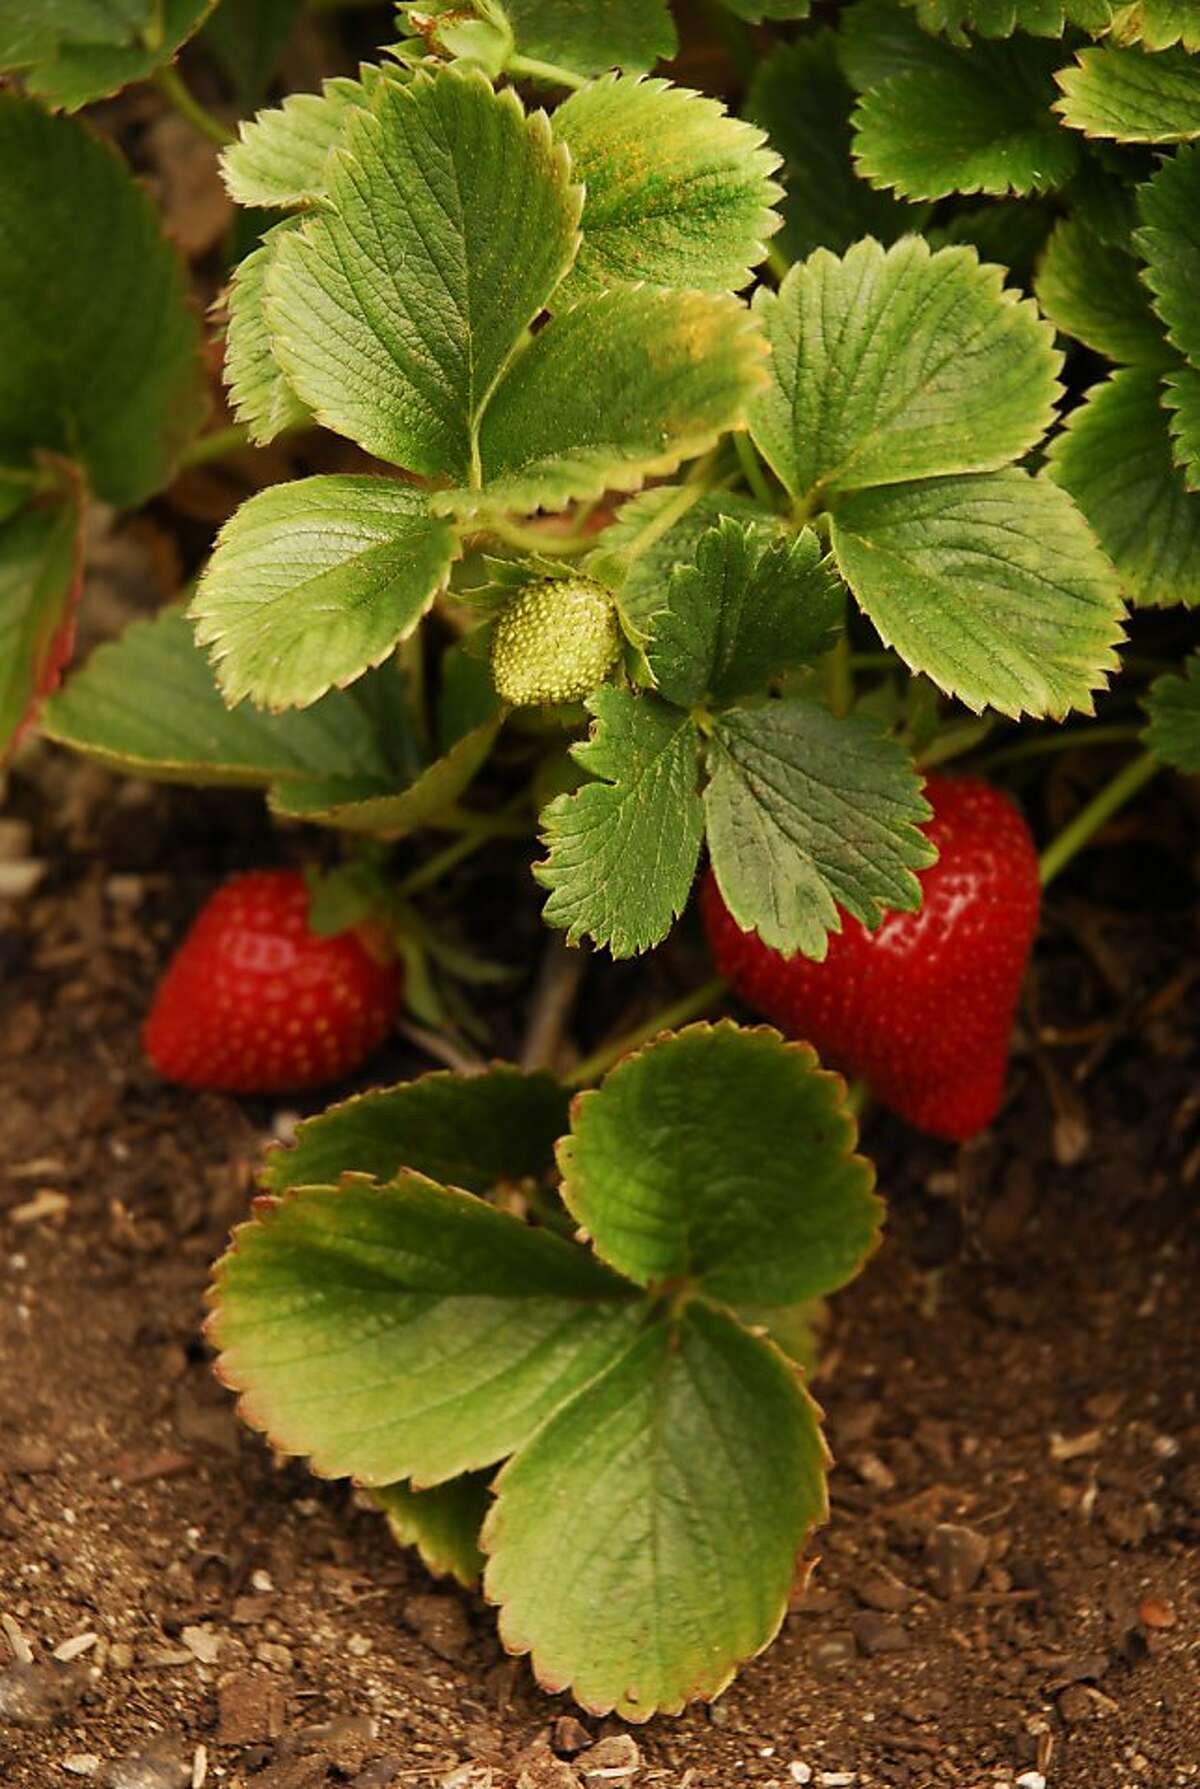 In cooler weather, strawberries may be firmer when ripe, but should be able to produce a good crop.